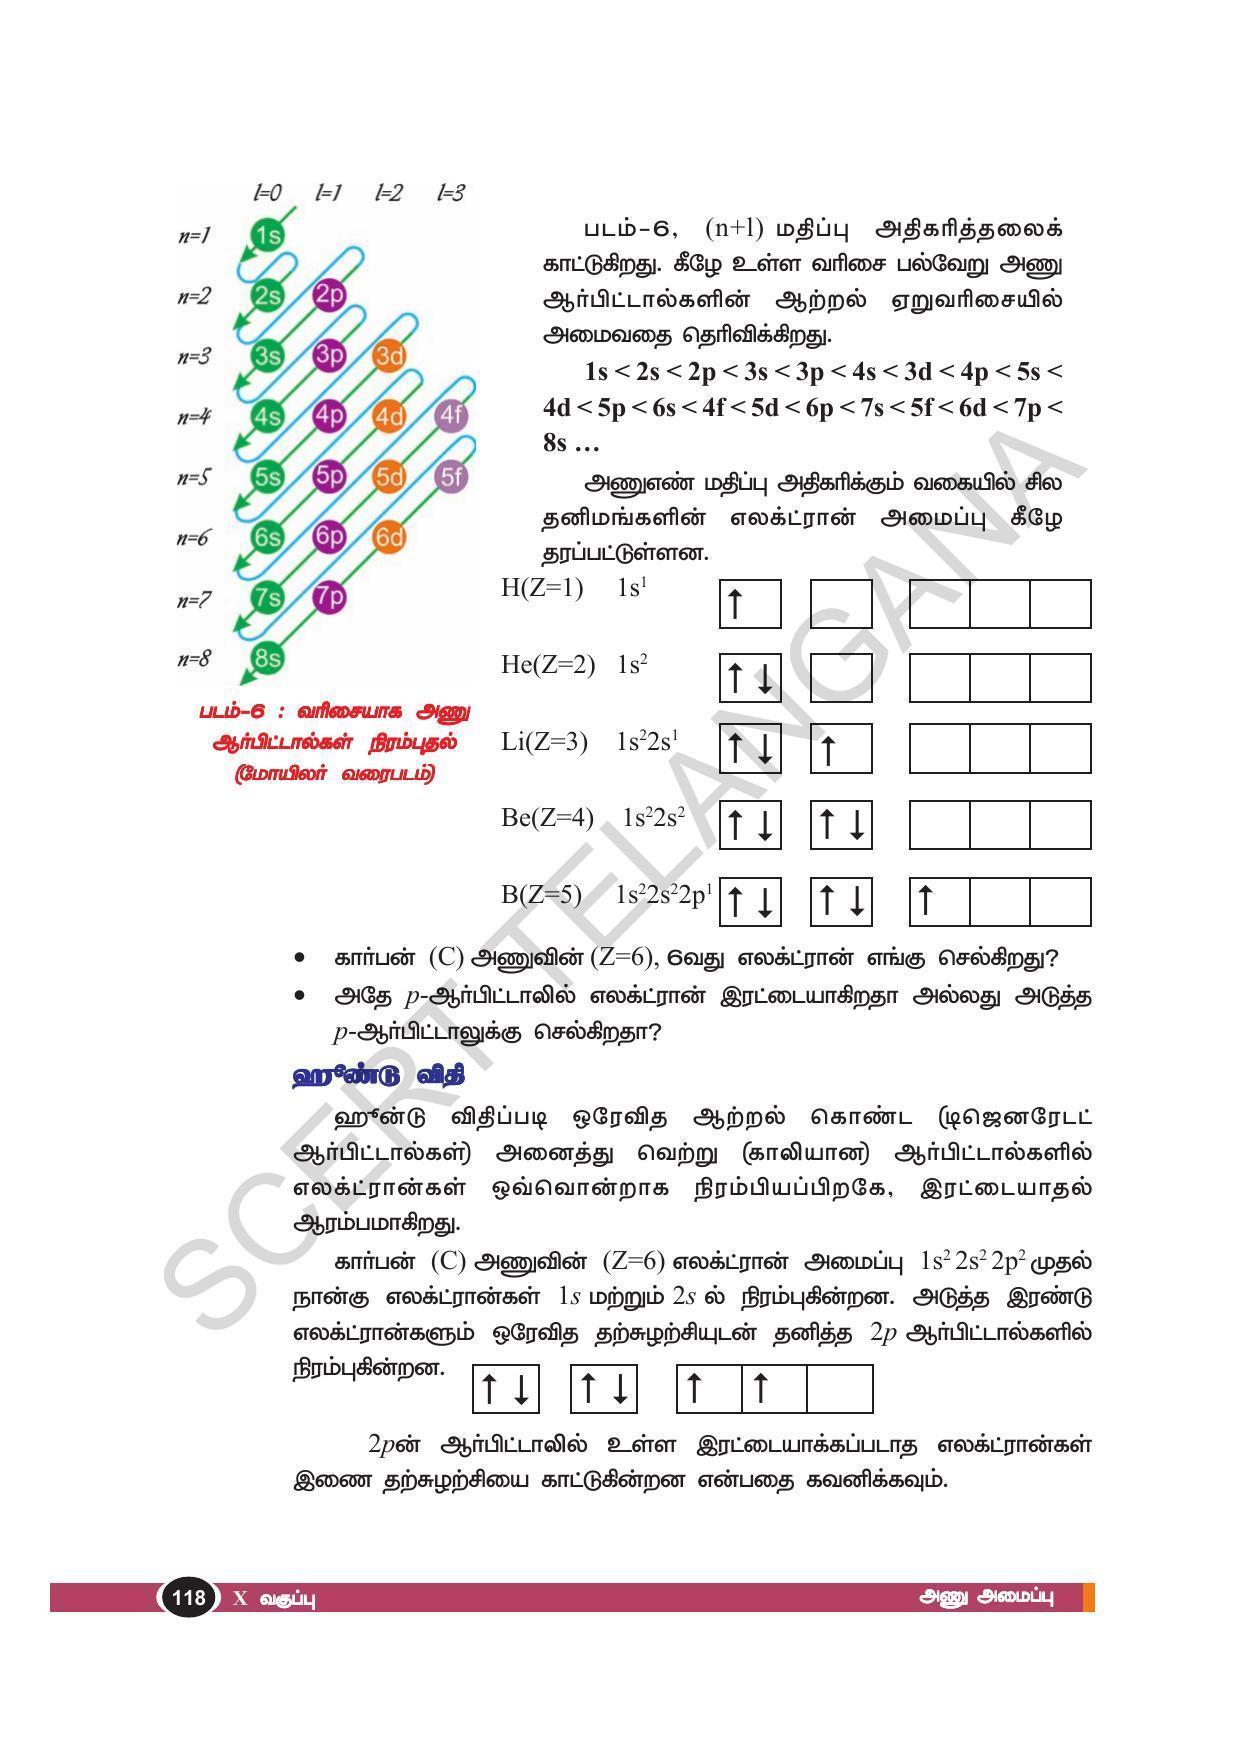 TS SCERT Class 10 Physical Science(Tamil Medium) Text Book - Page 130